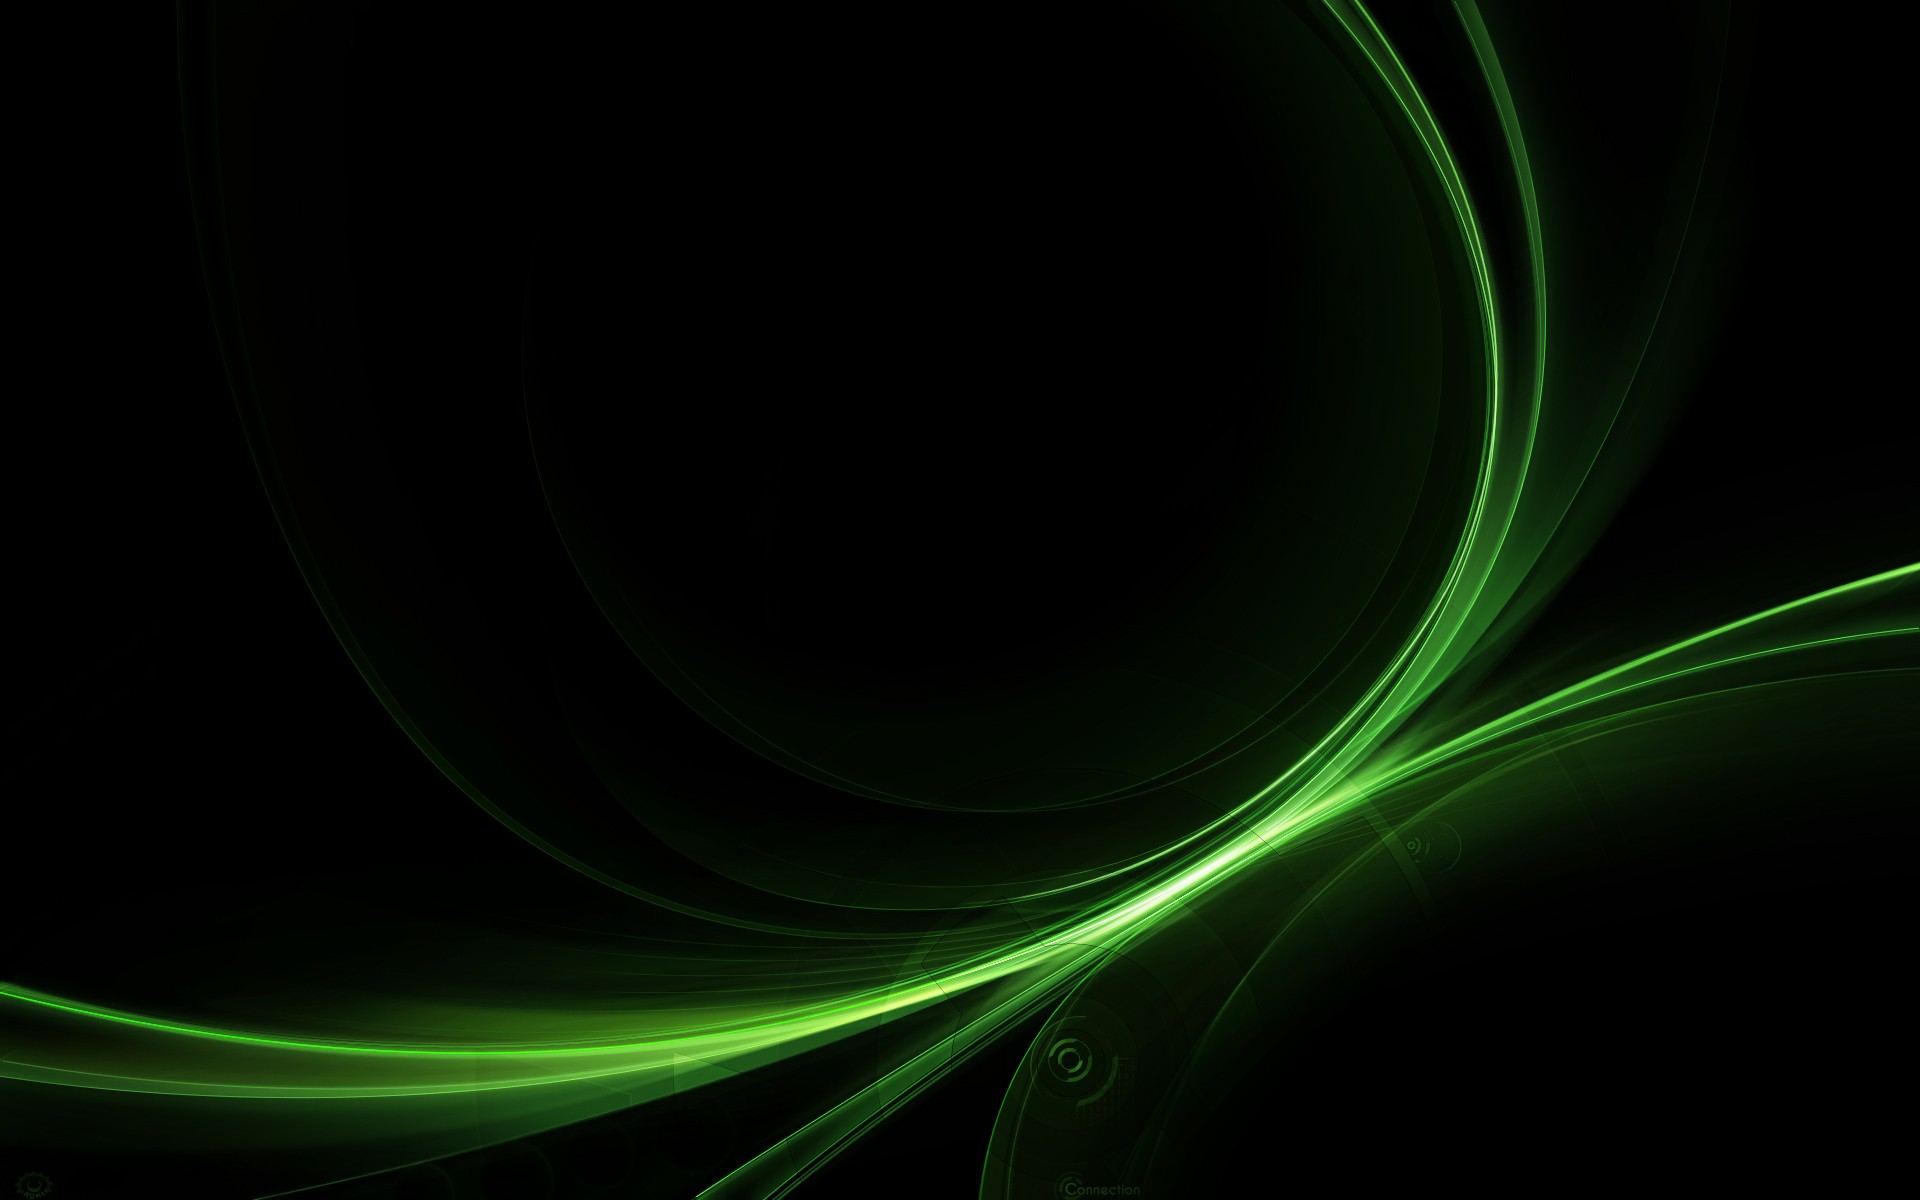  abstract dark lines wallpaper high definition wallpapers background1